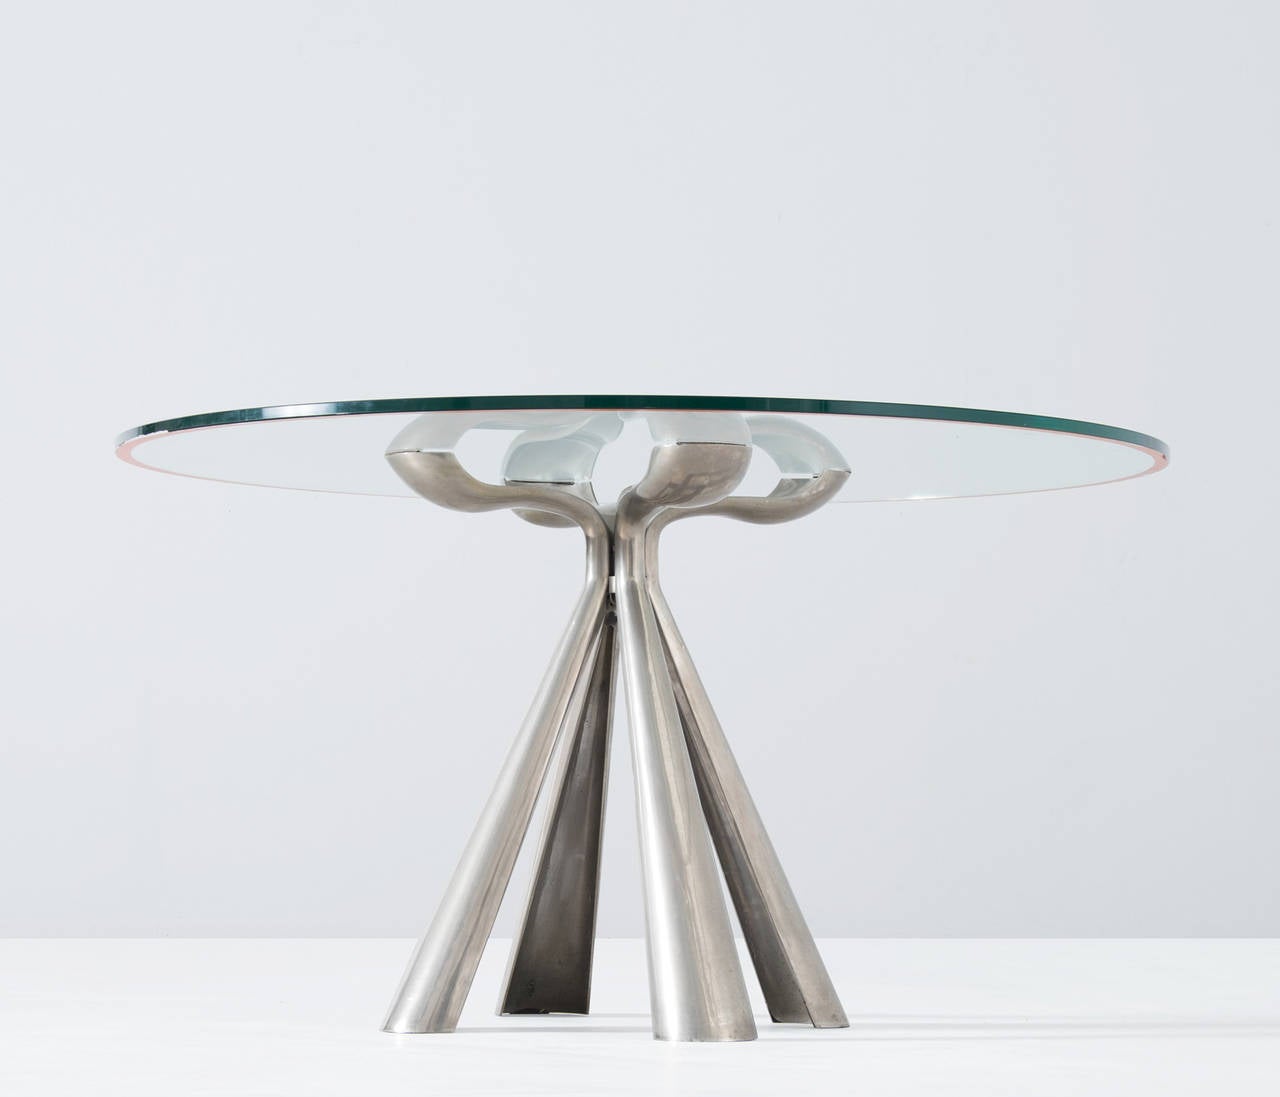 Dining table in aluminum and glass by Vittorio Introini for Saporiti, Italy, 1972.

This cast aluminum formed base is assembled of four organic formed parts which are centered in the middle. This resembles to a flower design. Completed with a